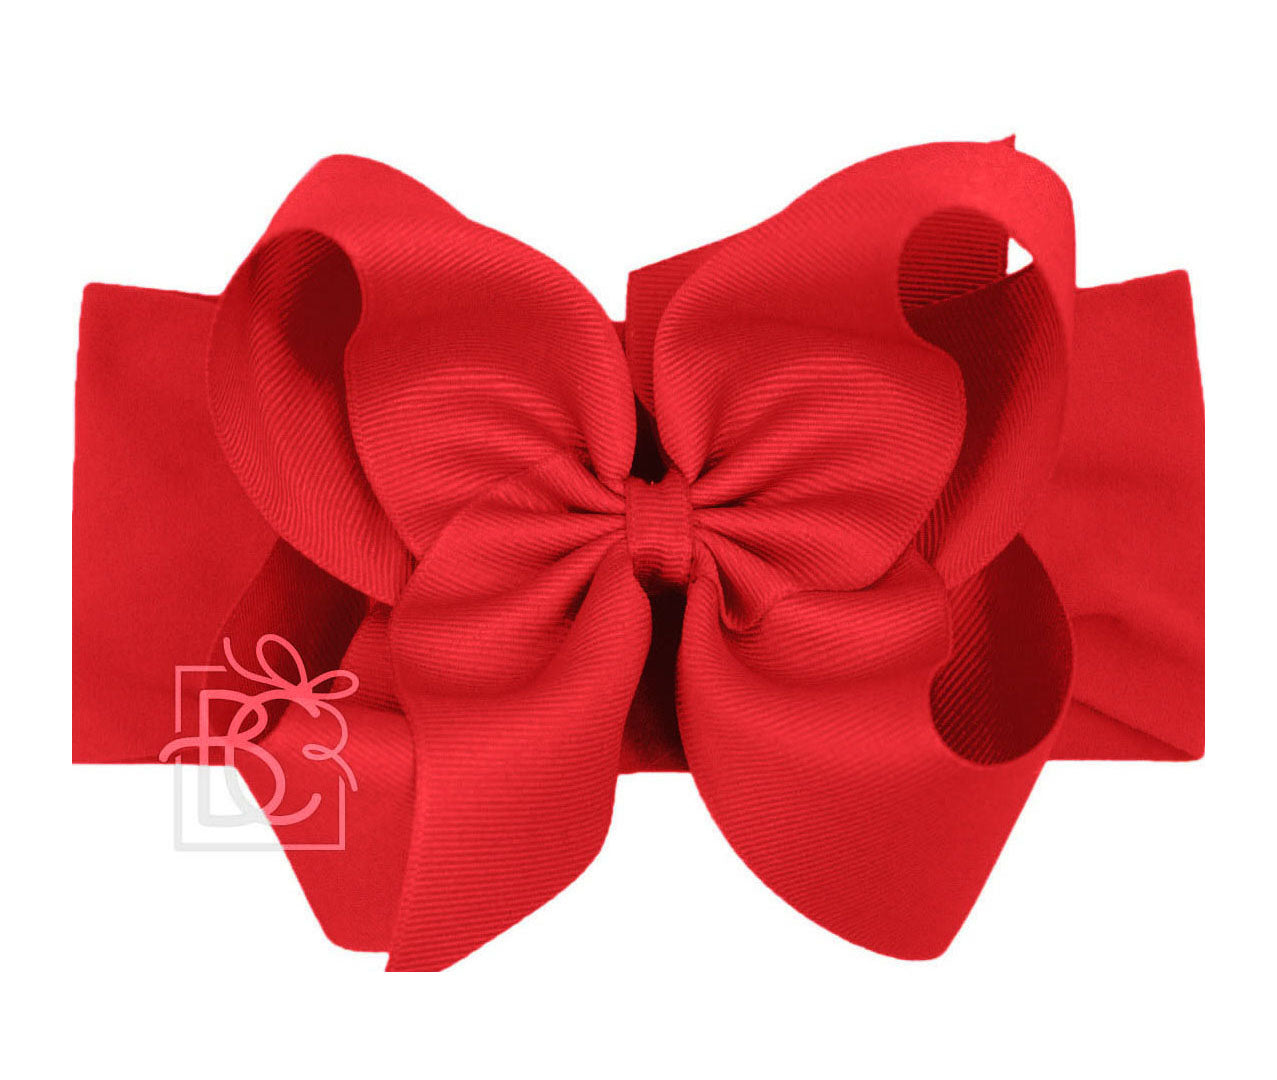 Beyond Creations’ Pantyhose Headband with Classic Grosgrain Bow